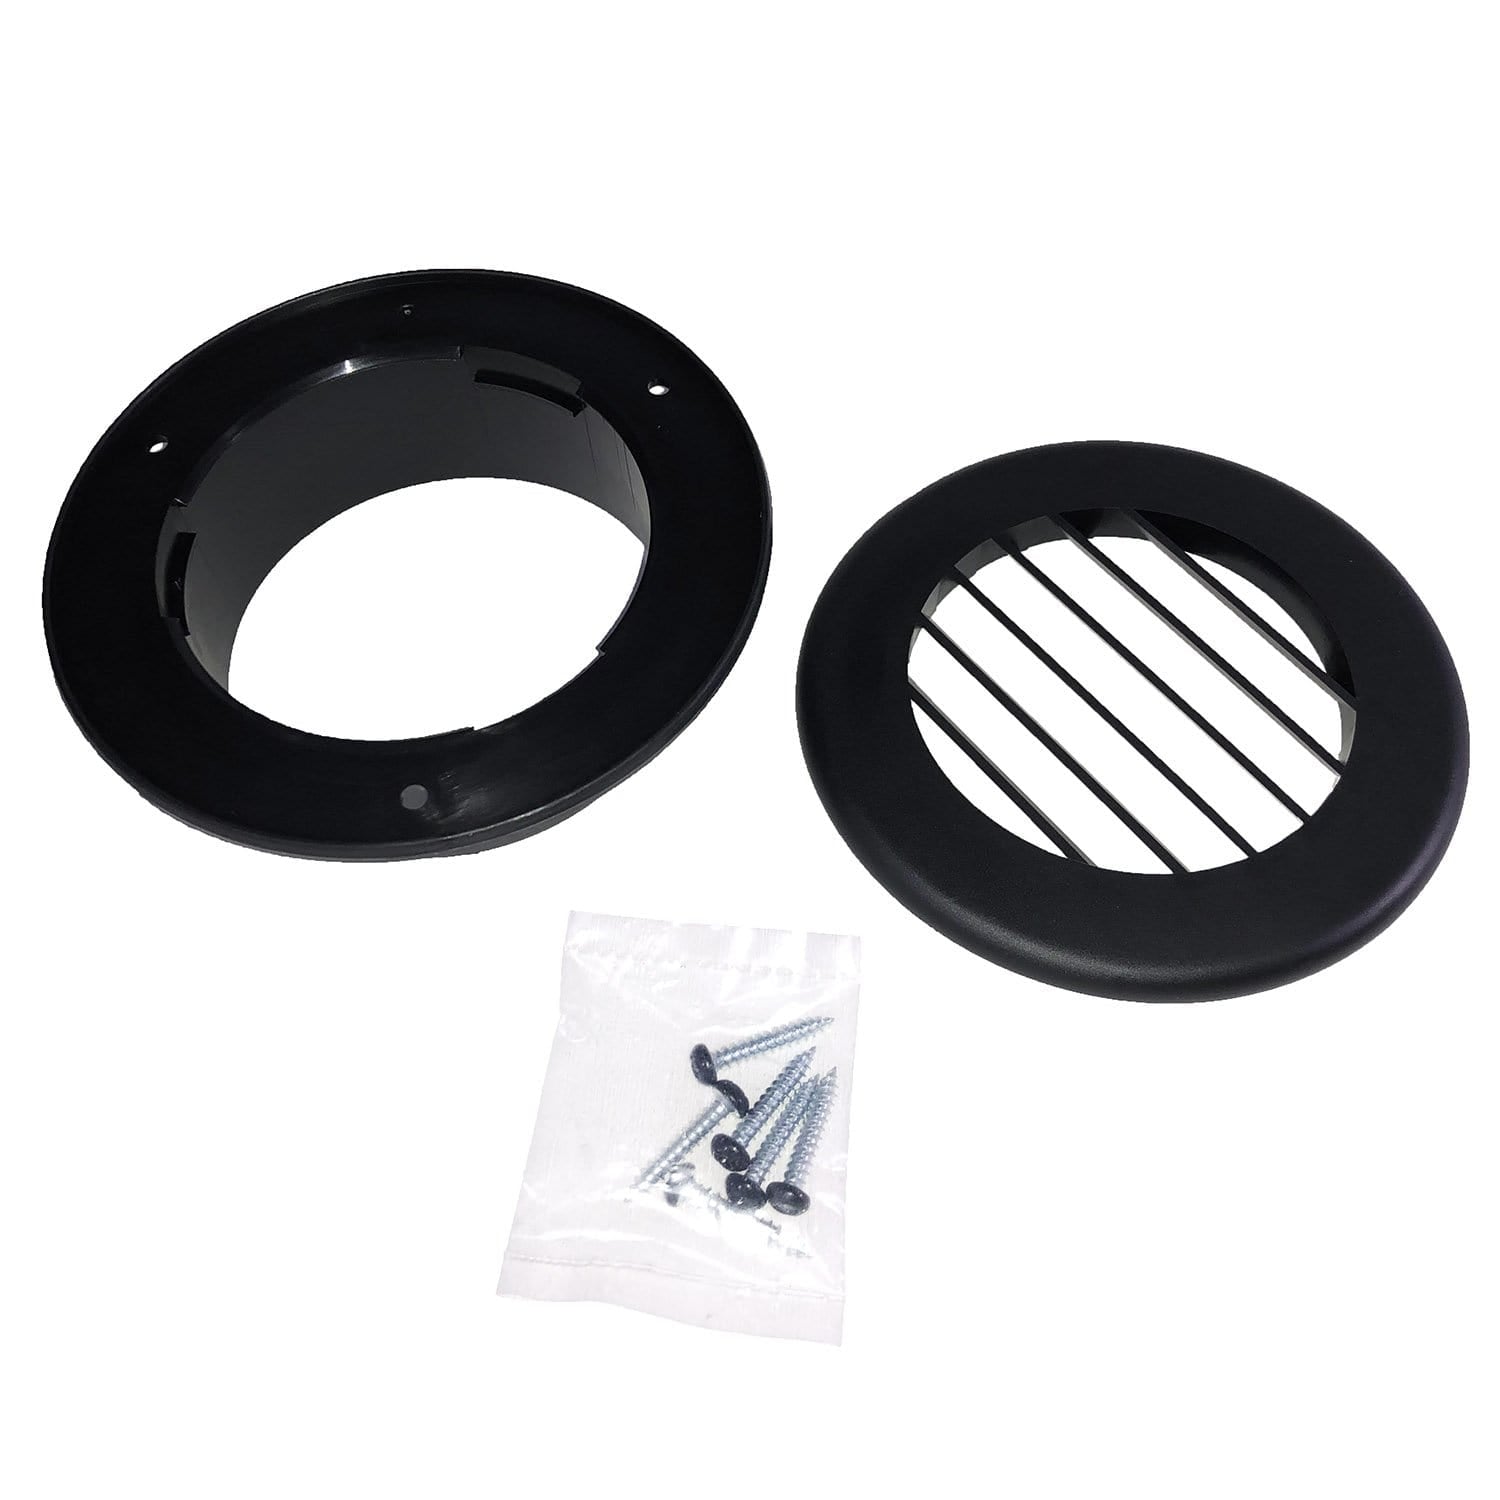 Thetford 94265 (601-015-94265) B&B Molders 4" Thermovent Ducted Heat Vent, No Damper, Black